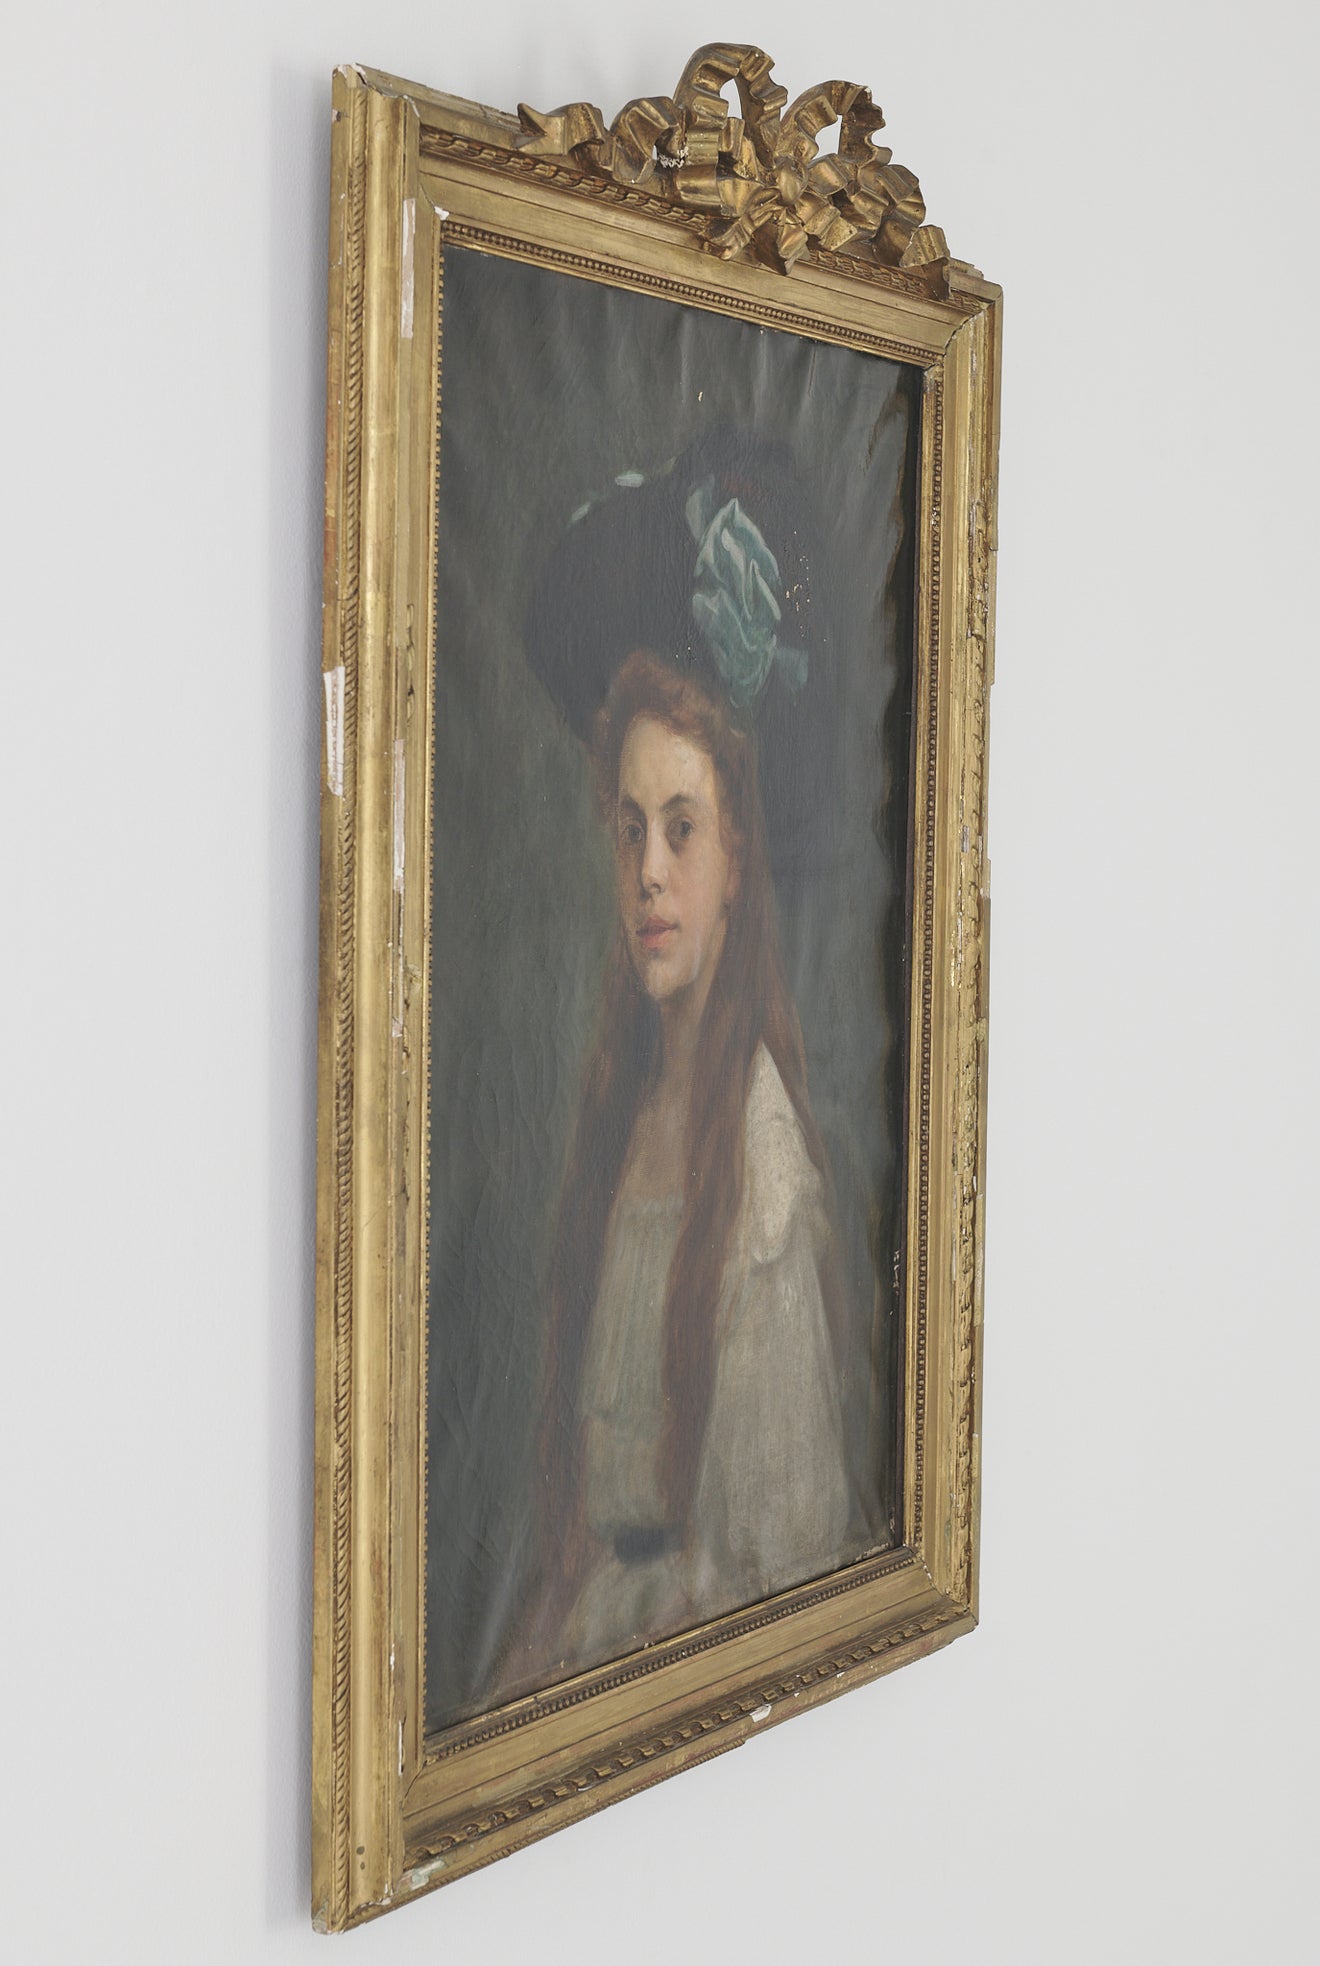 VICTORIAN PORTRAIT PAINTING OF A YOUNG WOMAN